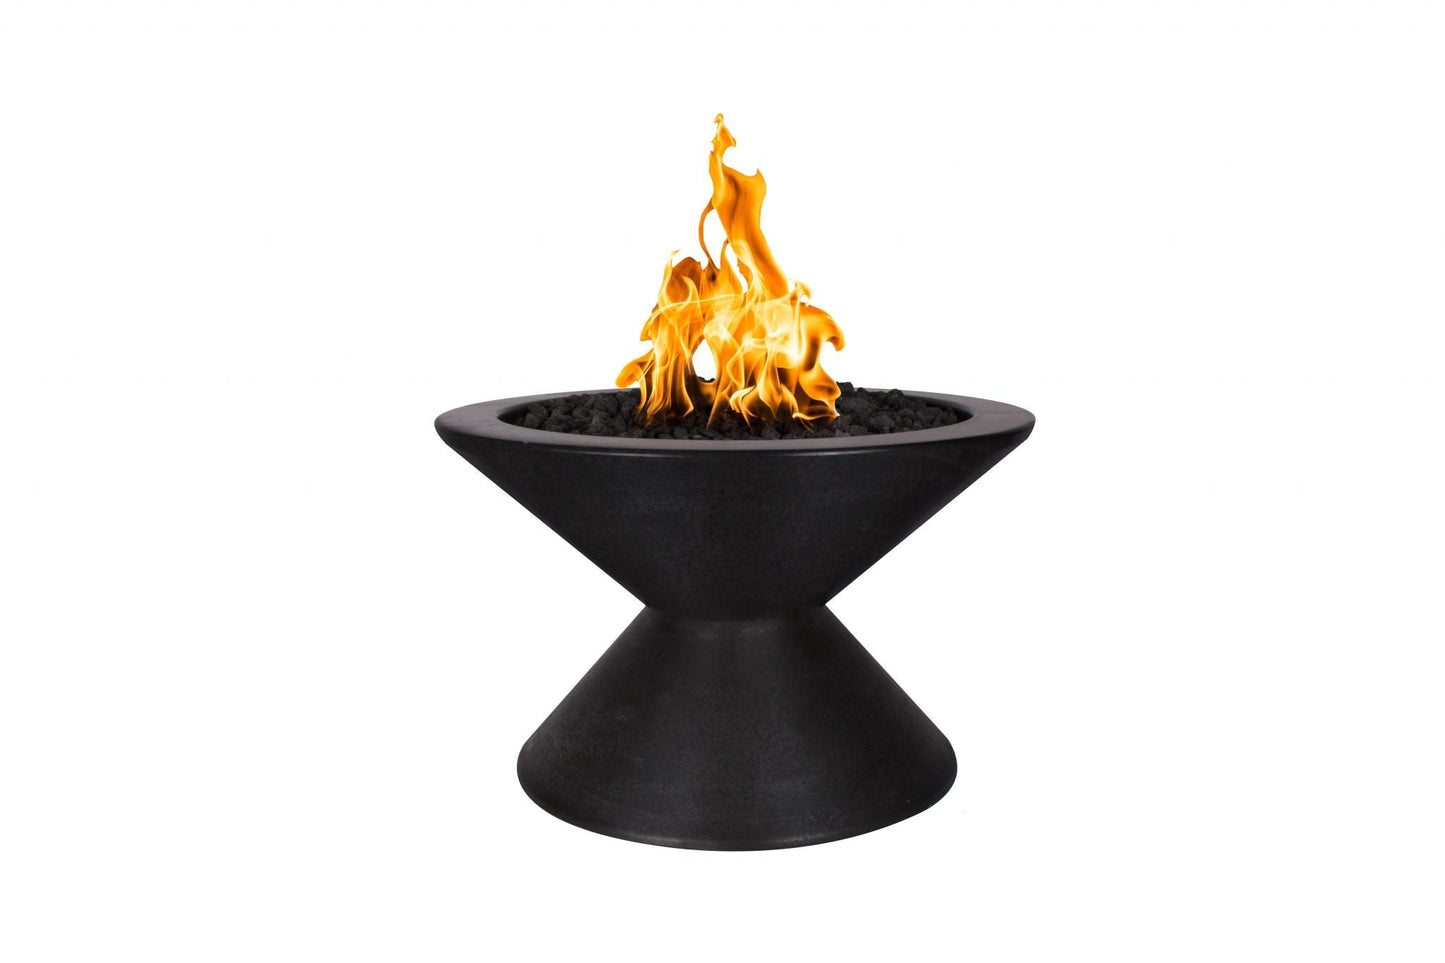 The Outdoor Plus Round Lucia 31" Metallic Copper GFRC Concrete Liquid Propane Fire Pit with 110V Electronic Ignition